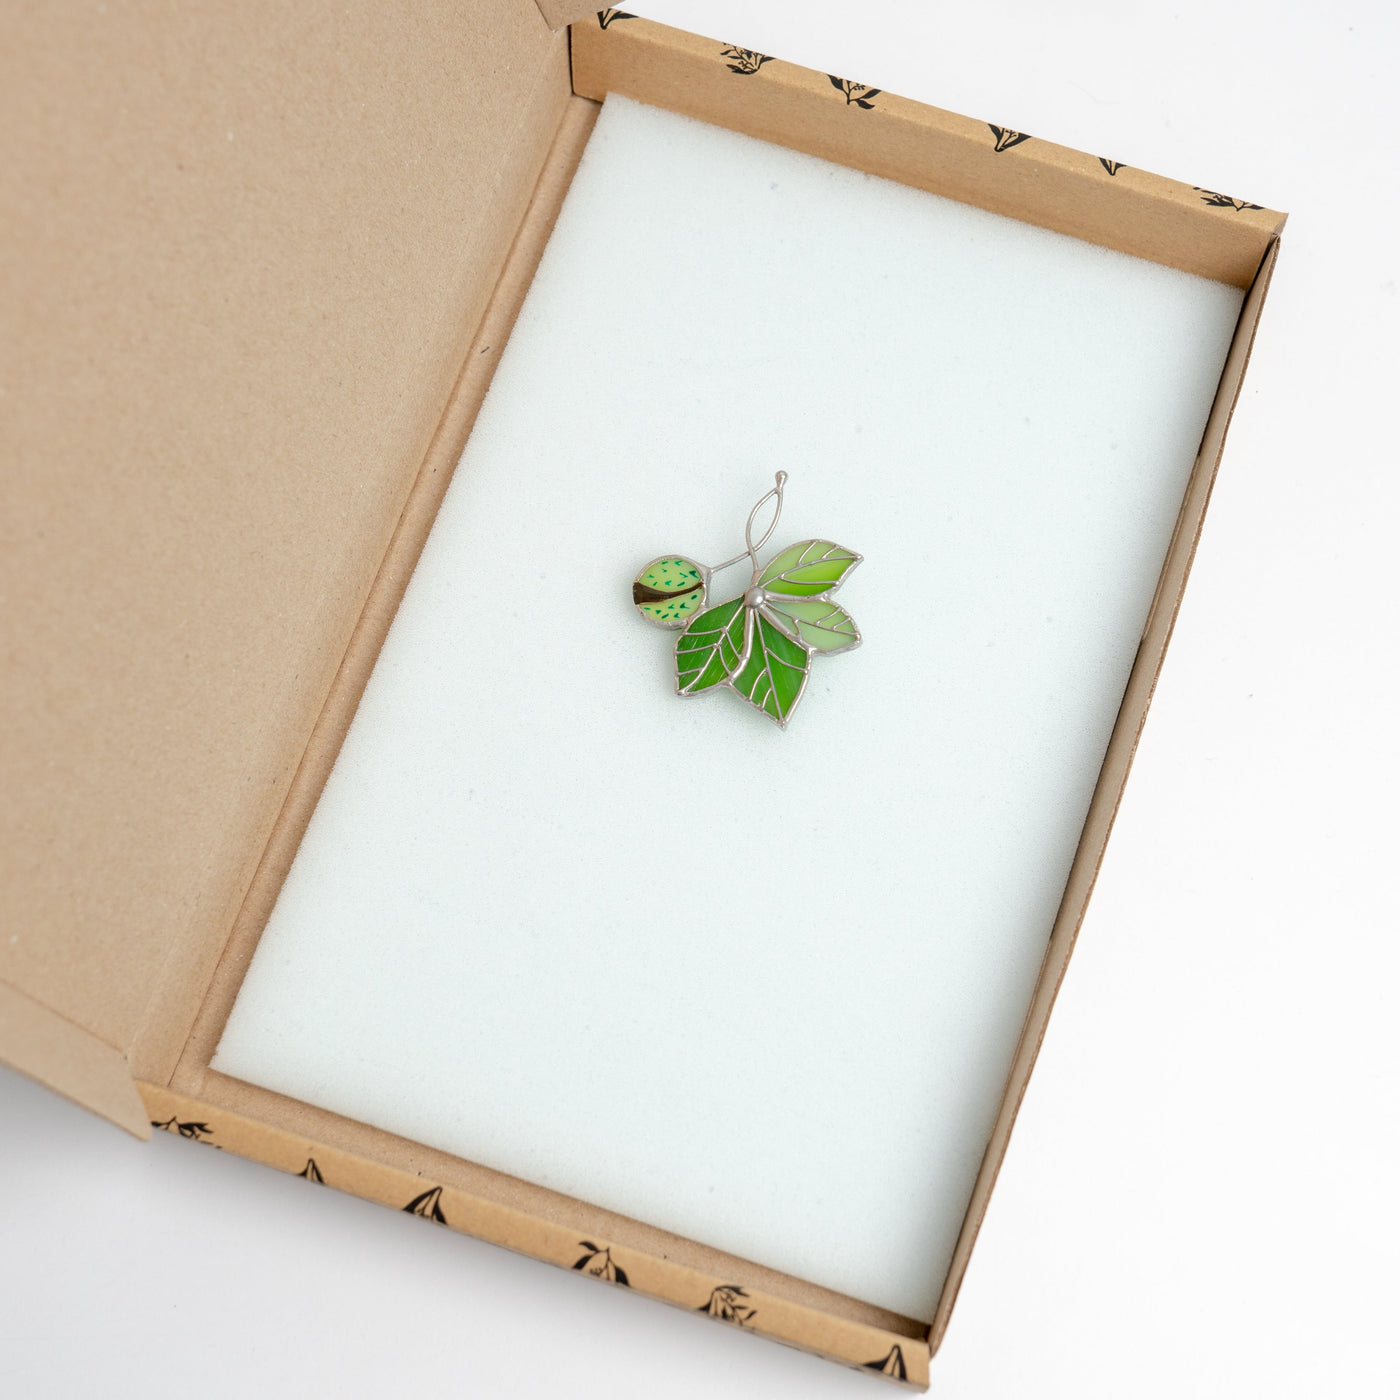 Stained glass chestnut with the leaves brooch in a brandbox